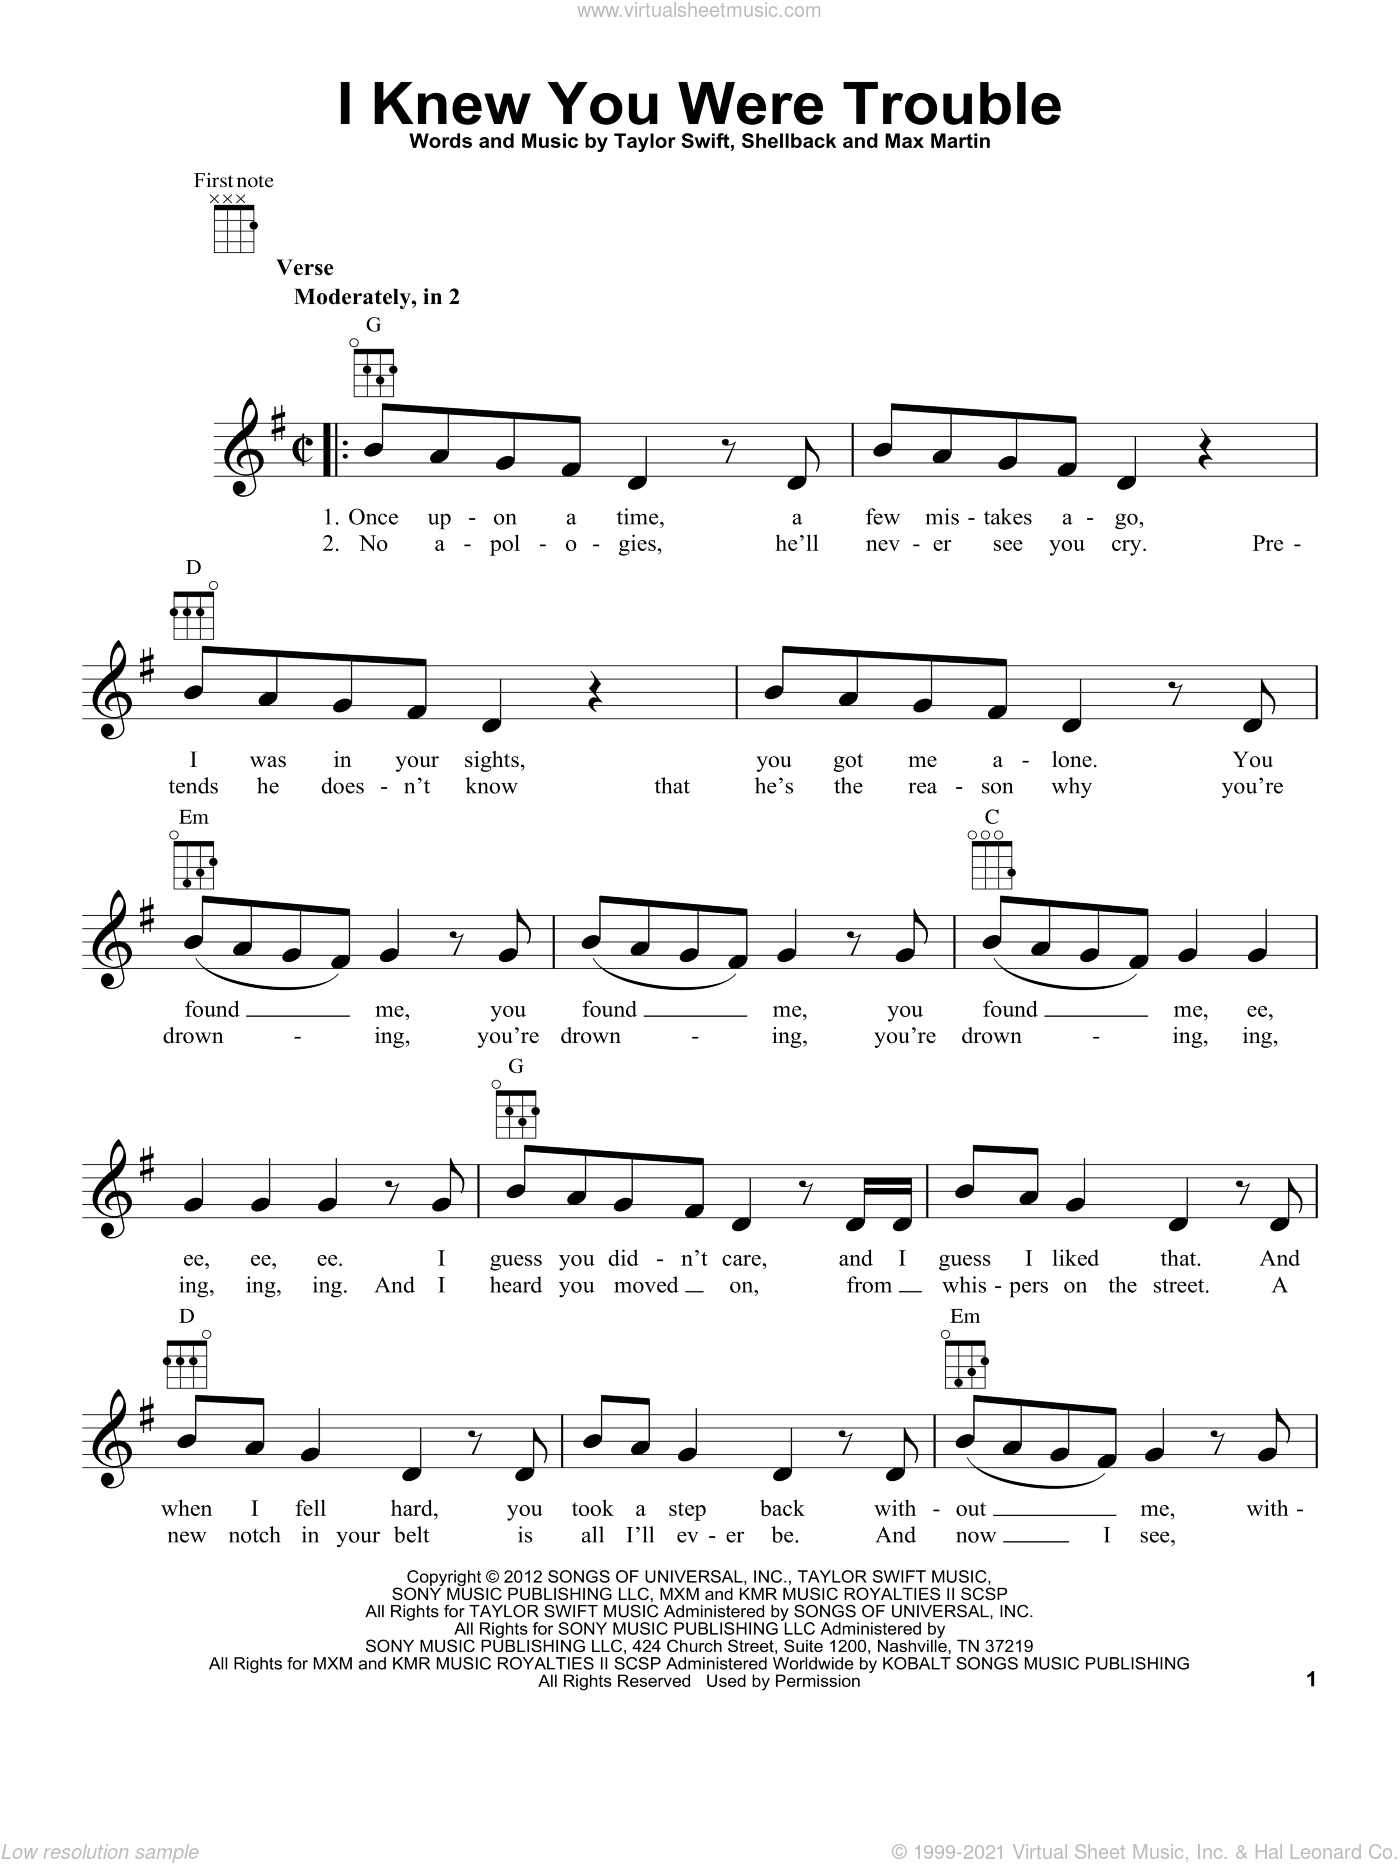 Swift I Knew You Were Trouble Sheet Music For Ukulele Pdf I knew you were trouble, fifteen, blank space, bad blood, out of the woods, soon you'll get better chordsound to play your music, studying scales, positions for guitar, search, manage, request and send chords, lyrics and sheet music. swift i knew you were trouble sheet music for ukulele pdf